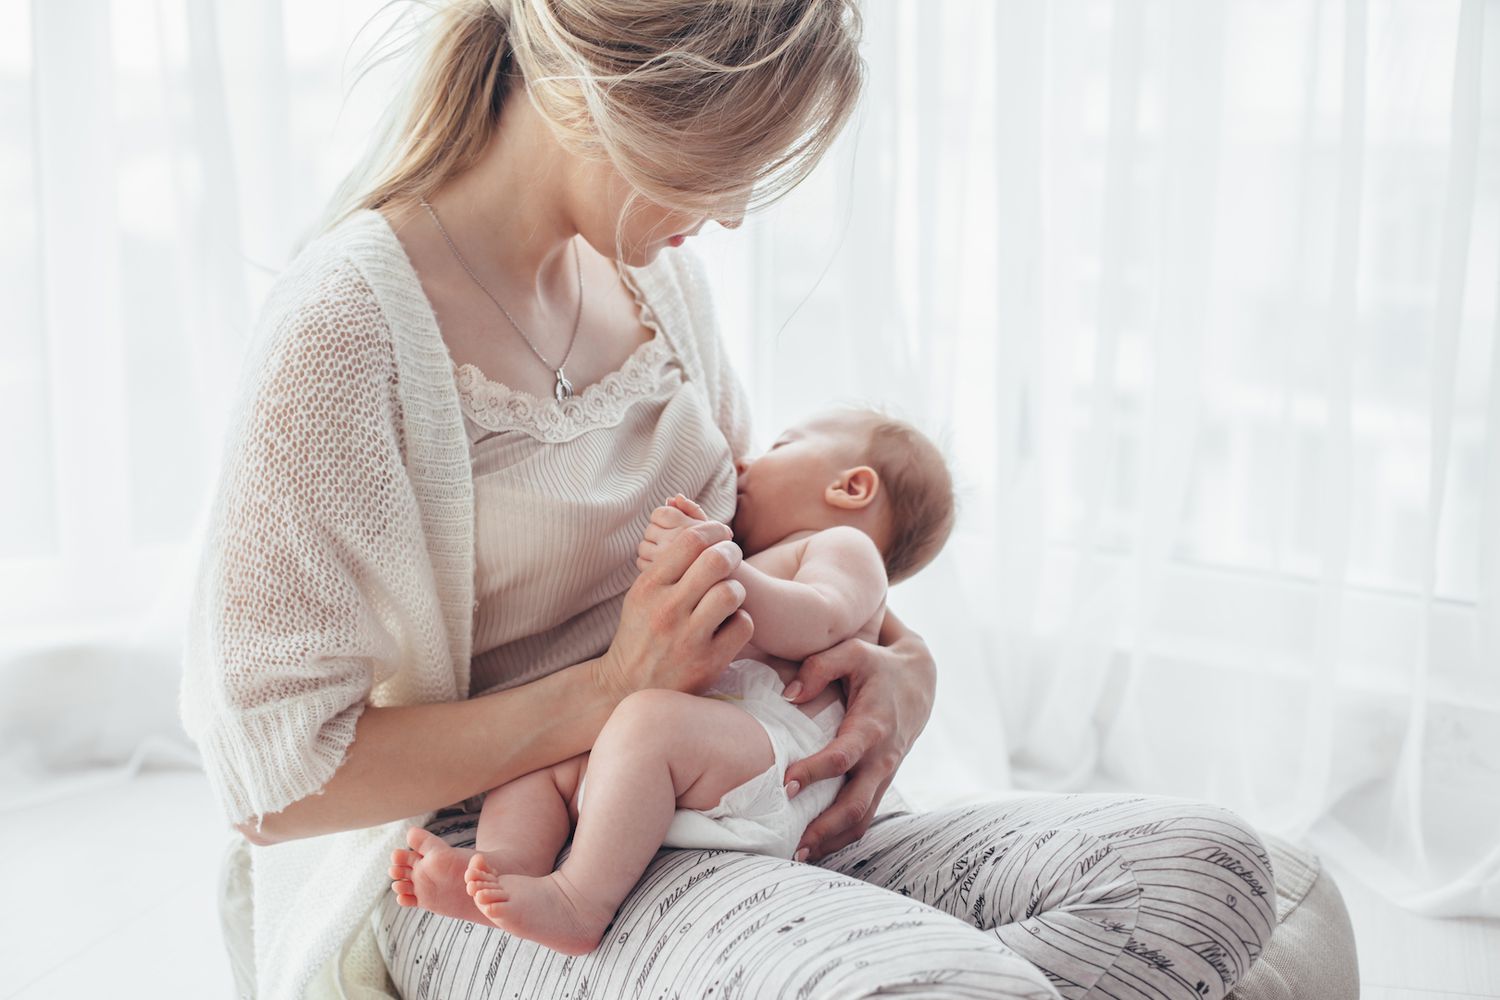 Breastfeeding: Advice, Nutrition & Pumping Tips | Parents